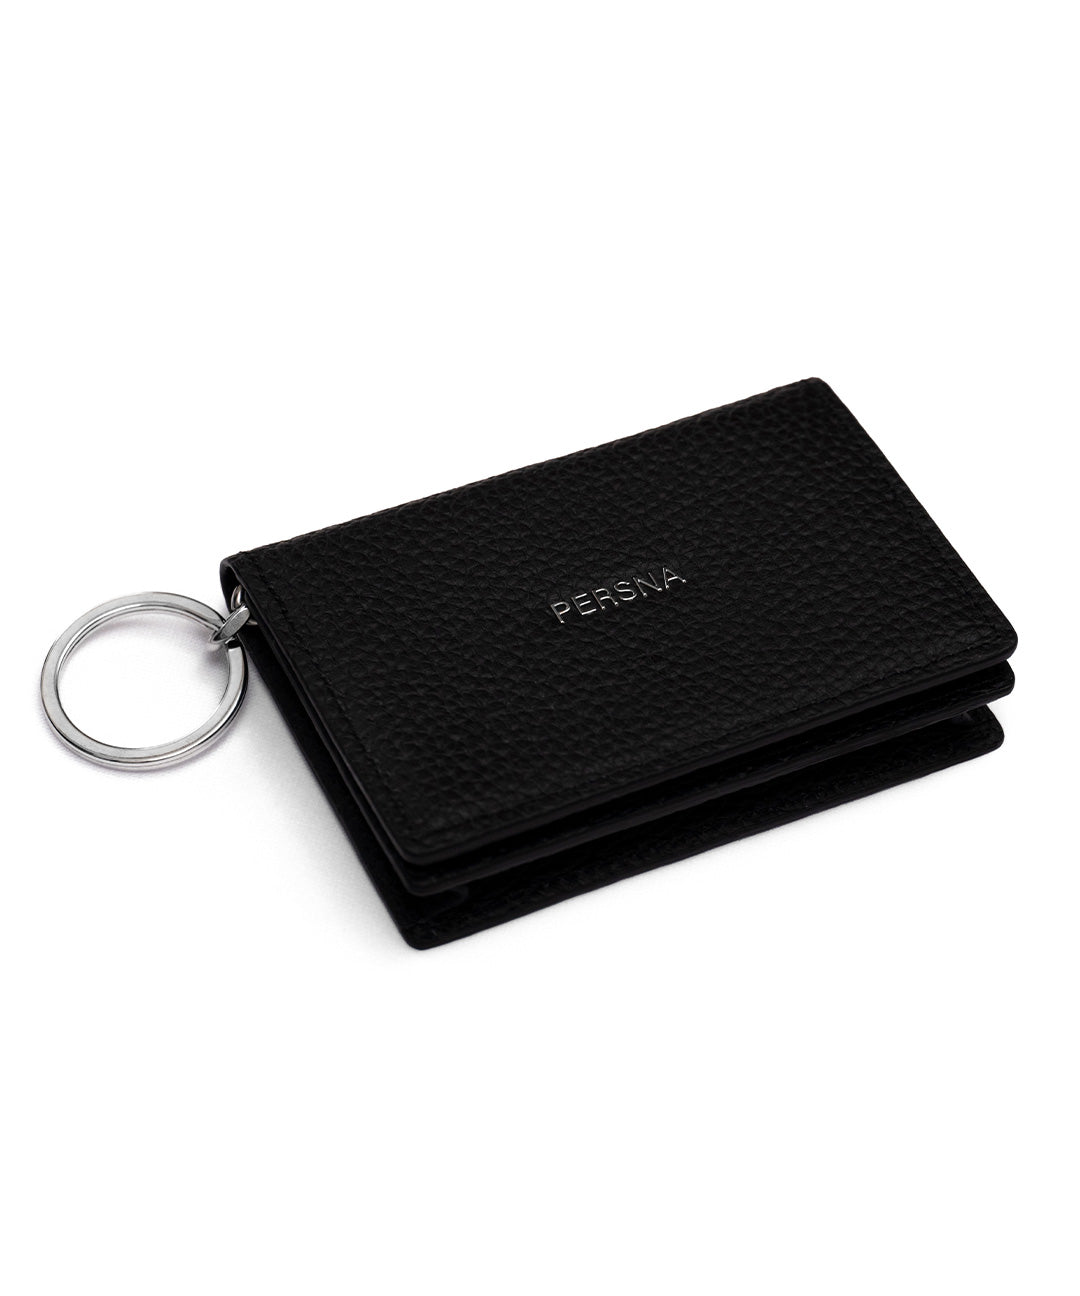 Persna card wallet (leather)